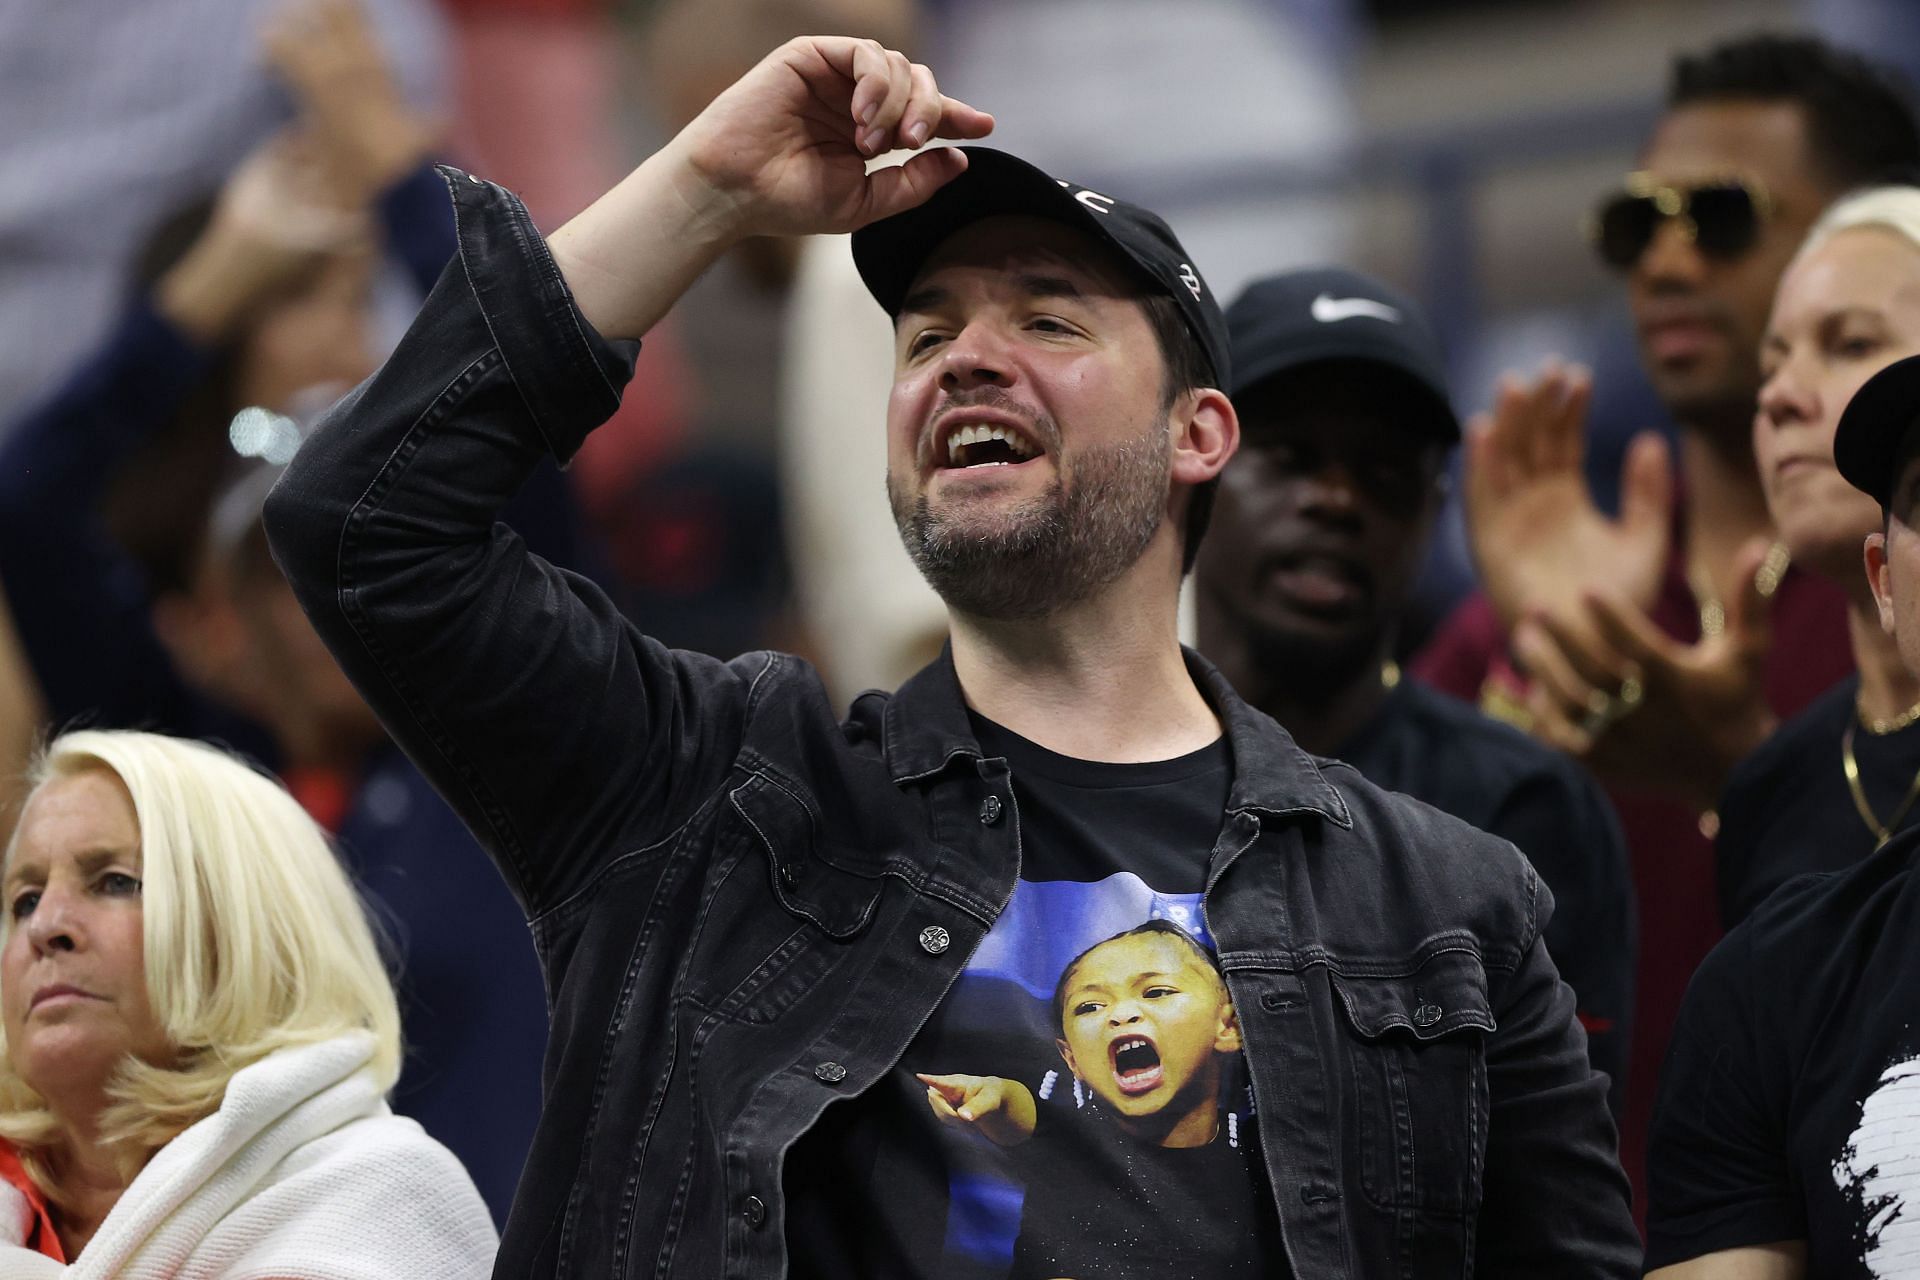 Alexis Ohanian cheering Serena Williams at the US Open